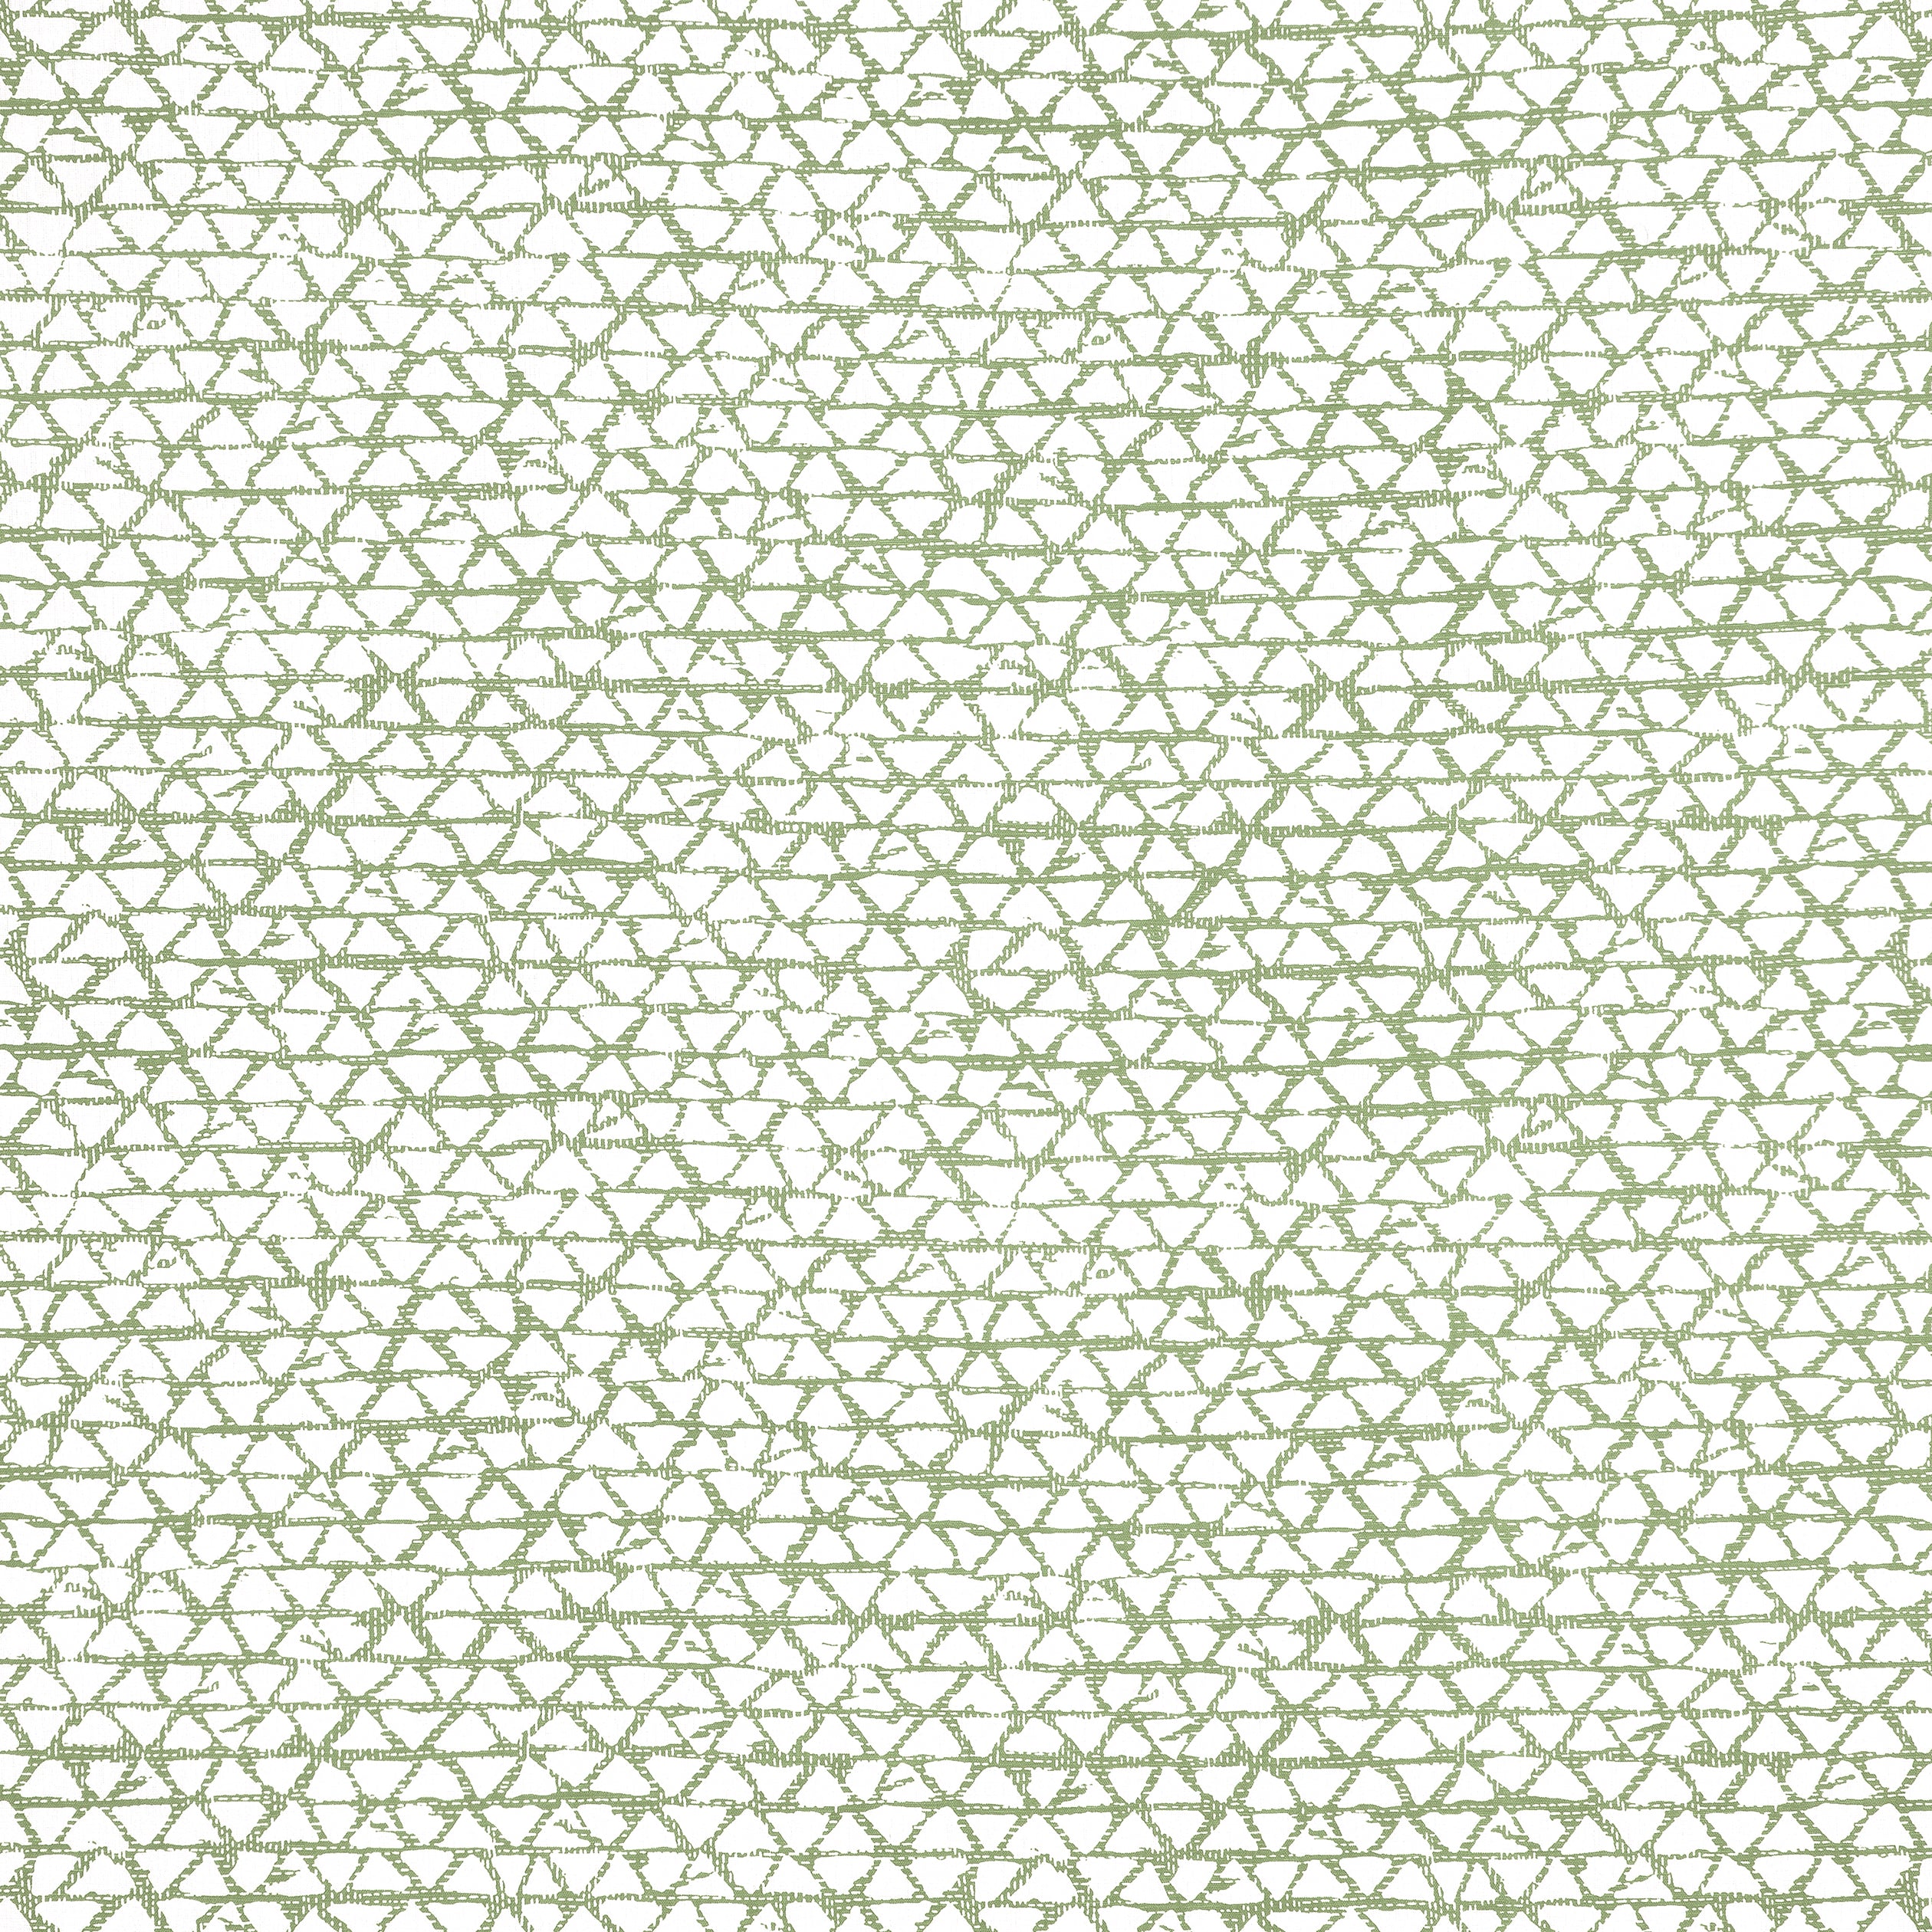 Maluku fabric in spruce color - pattern number F981330 - by Thibaut in the Montecito collection